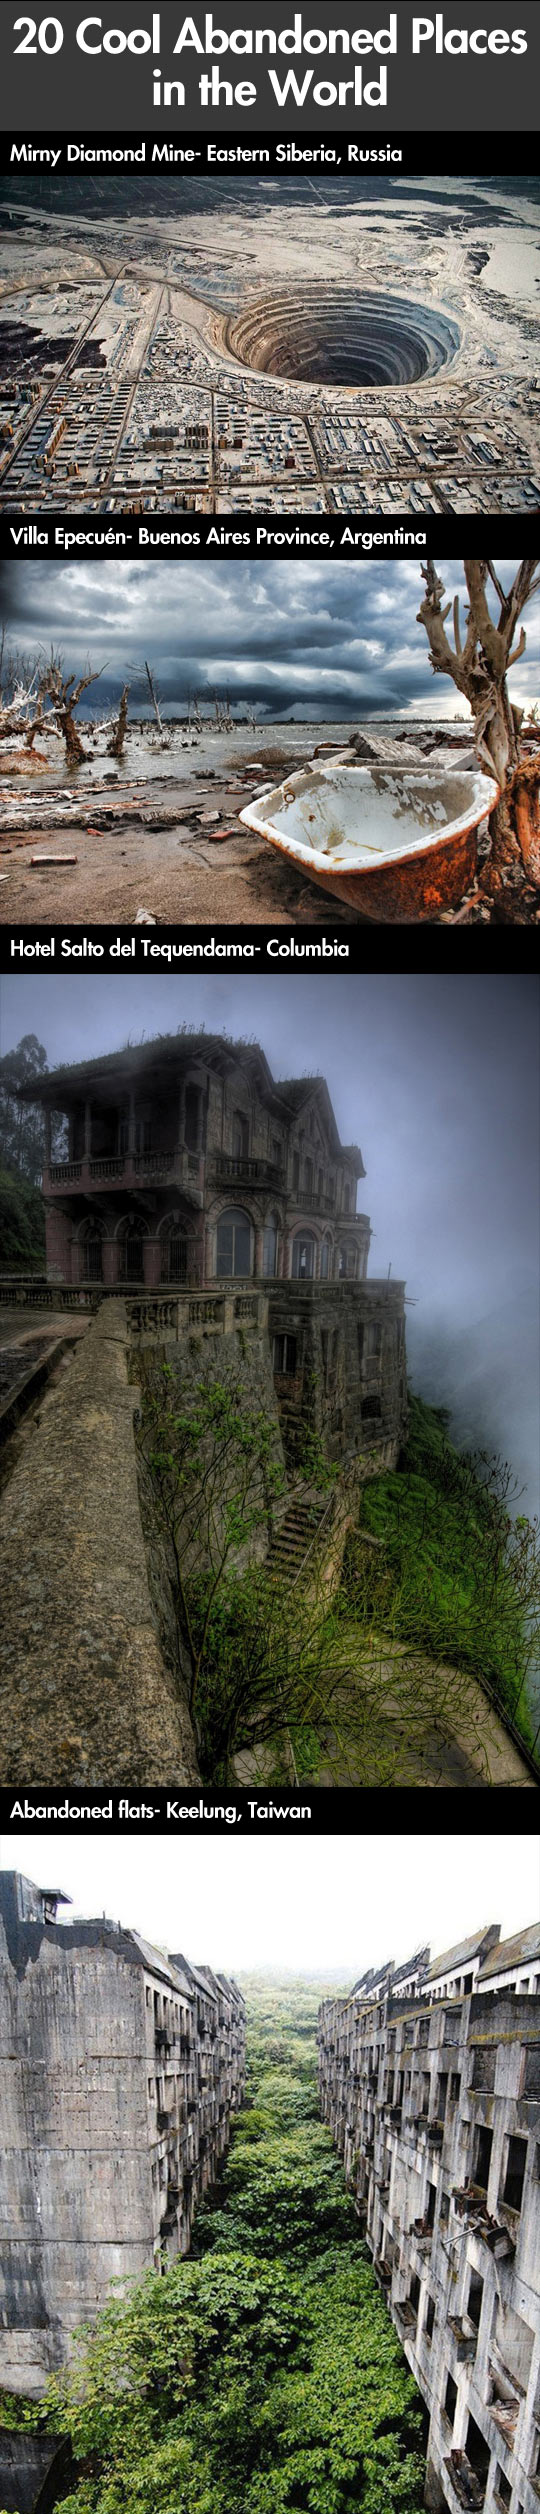 Abandoned Places in the World...